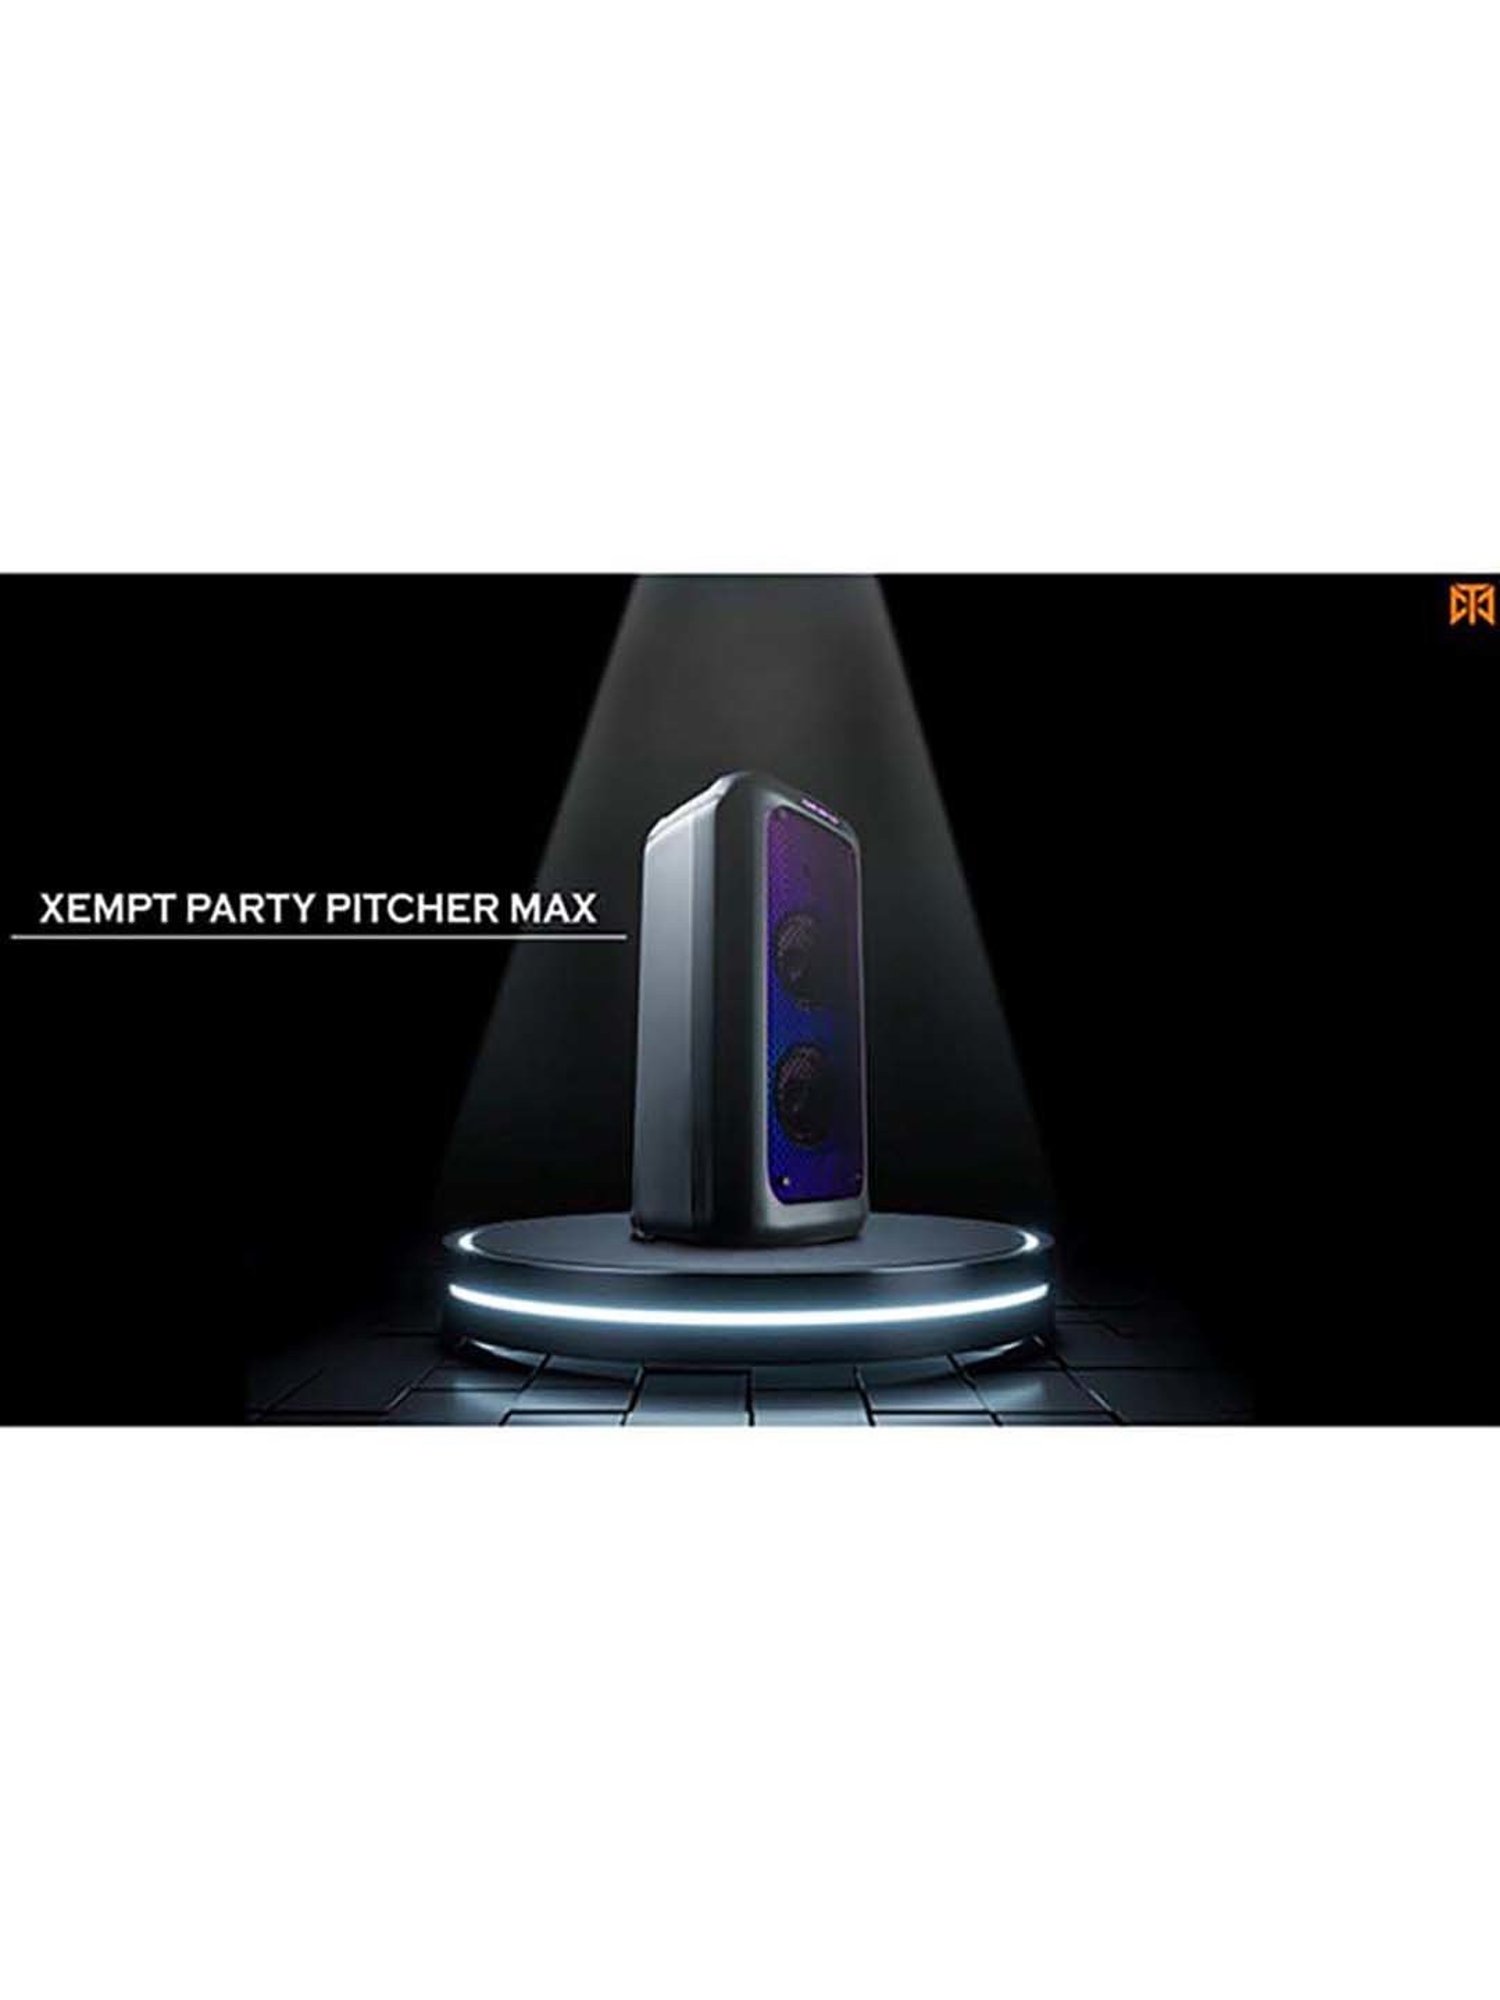 XEMPT introduces an advanced 'Party Pitcher Max' Bluetooth Party speaker -  DEVICENEXT